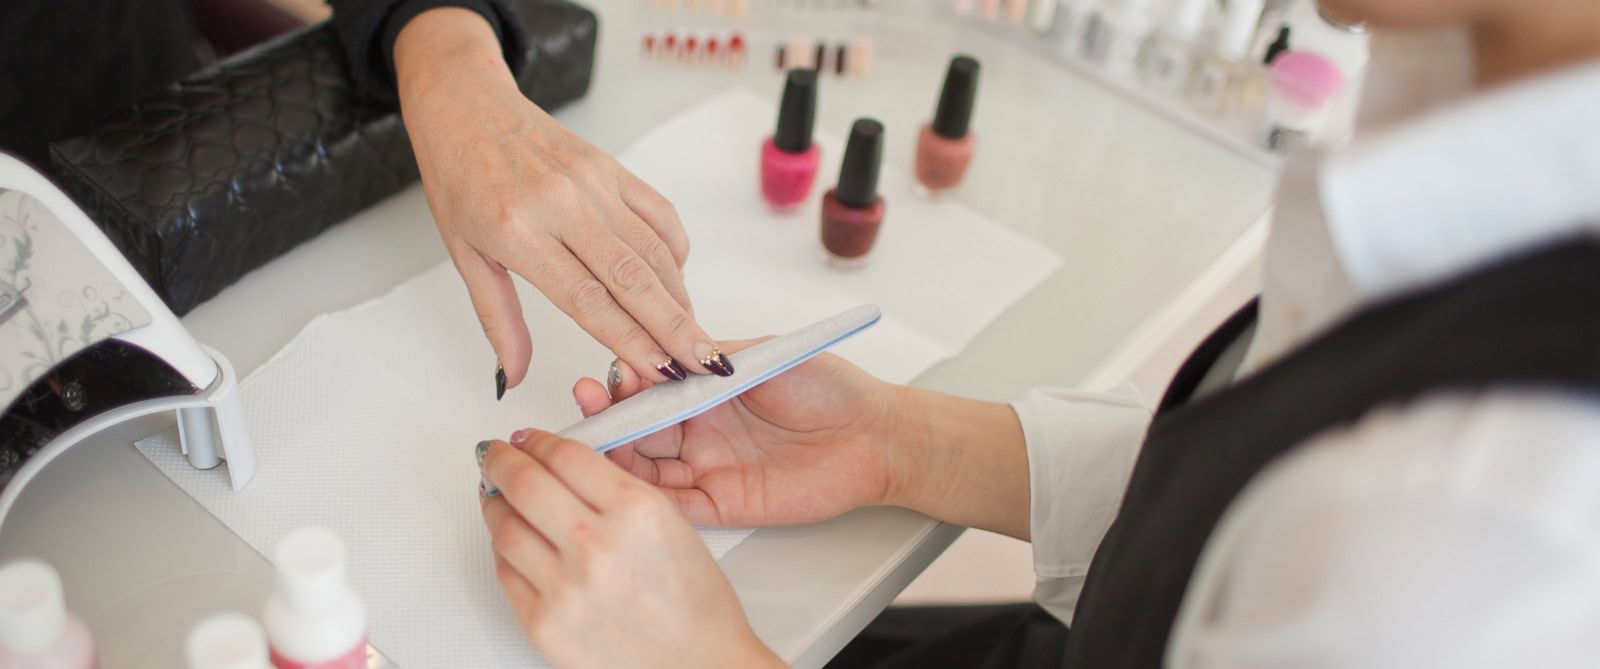 Finger Nail Salons Near Me - Nail and Manicure Trends